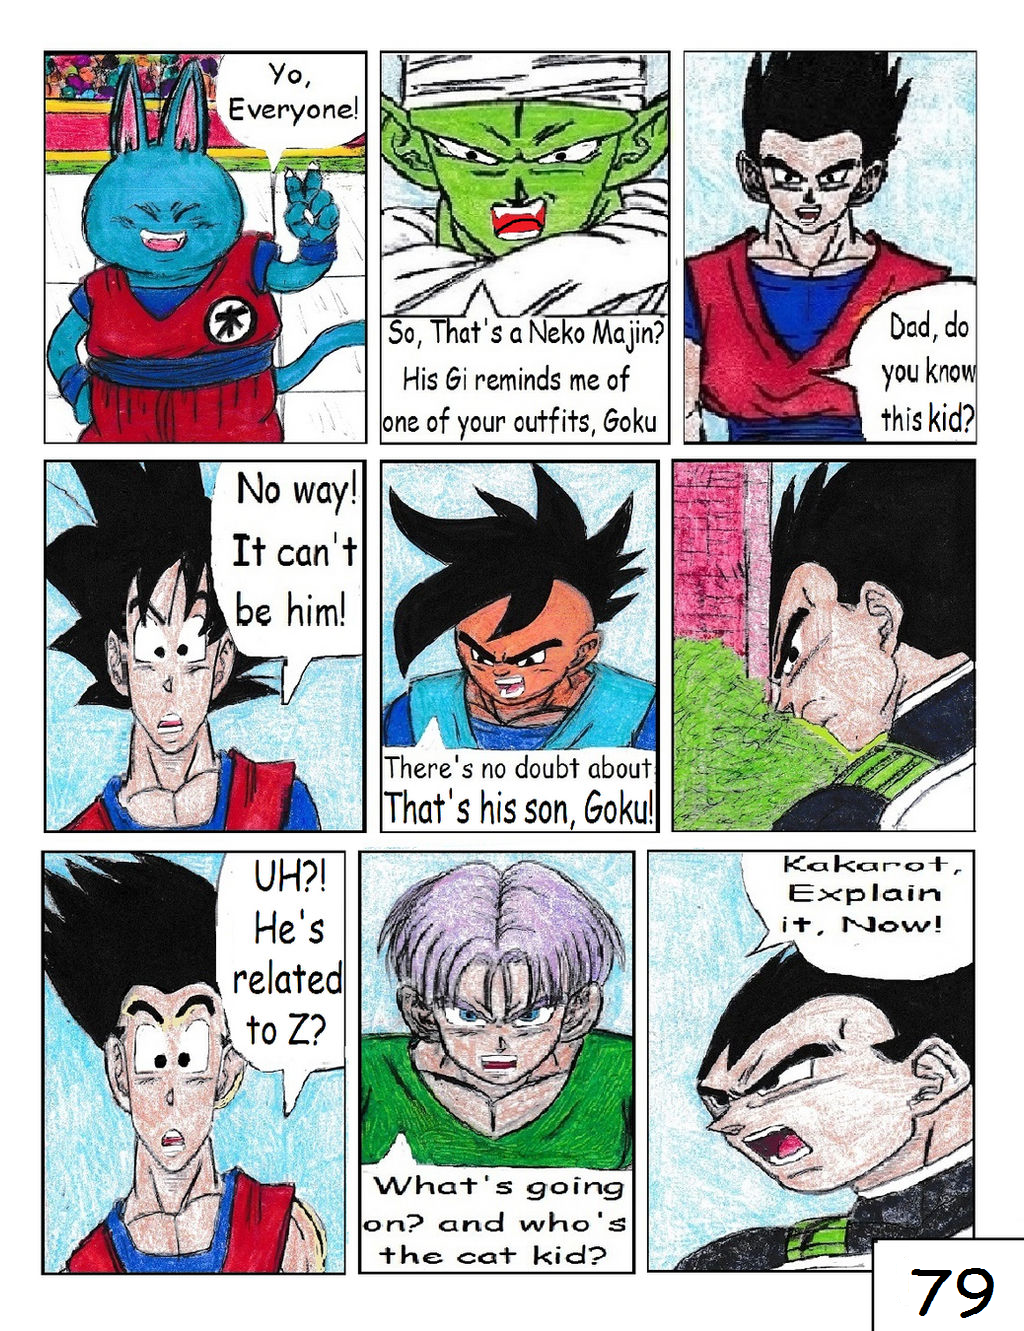 Dragon Ball SF Volume 1 Page 15 by NeoOllice on DeviantArt